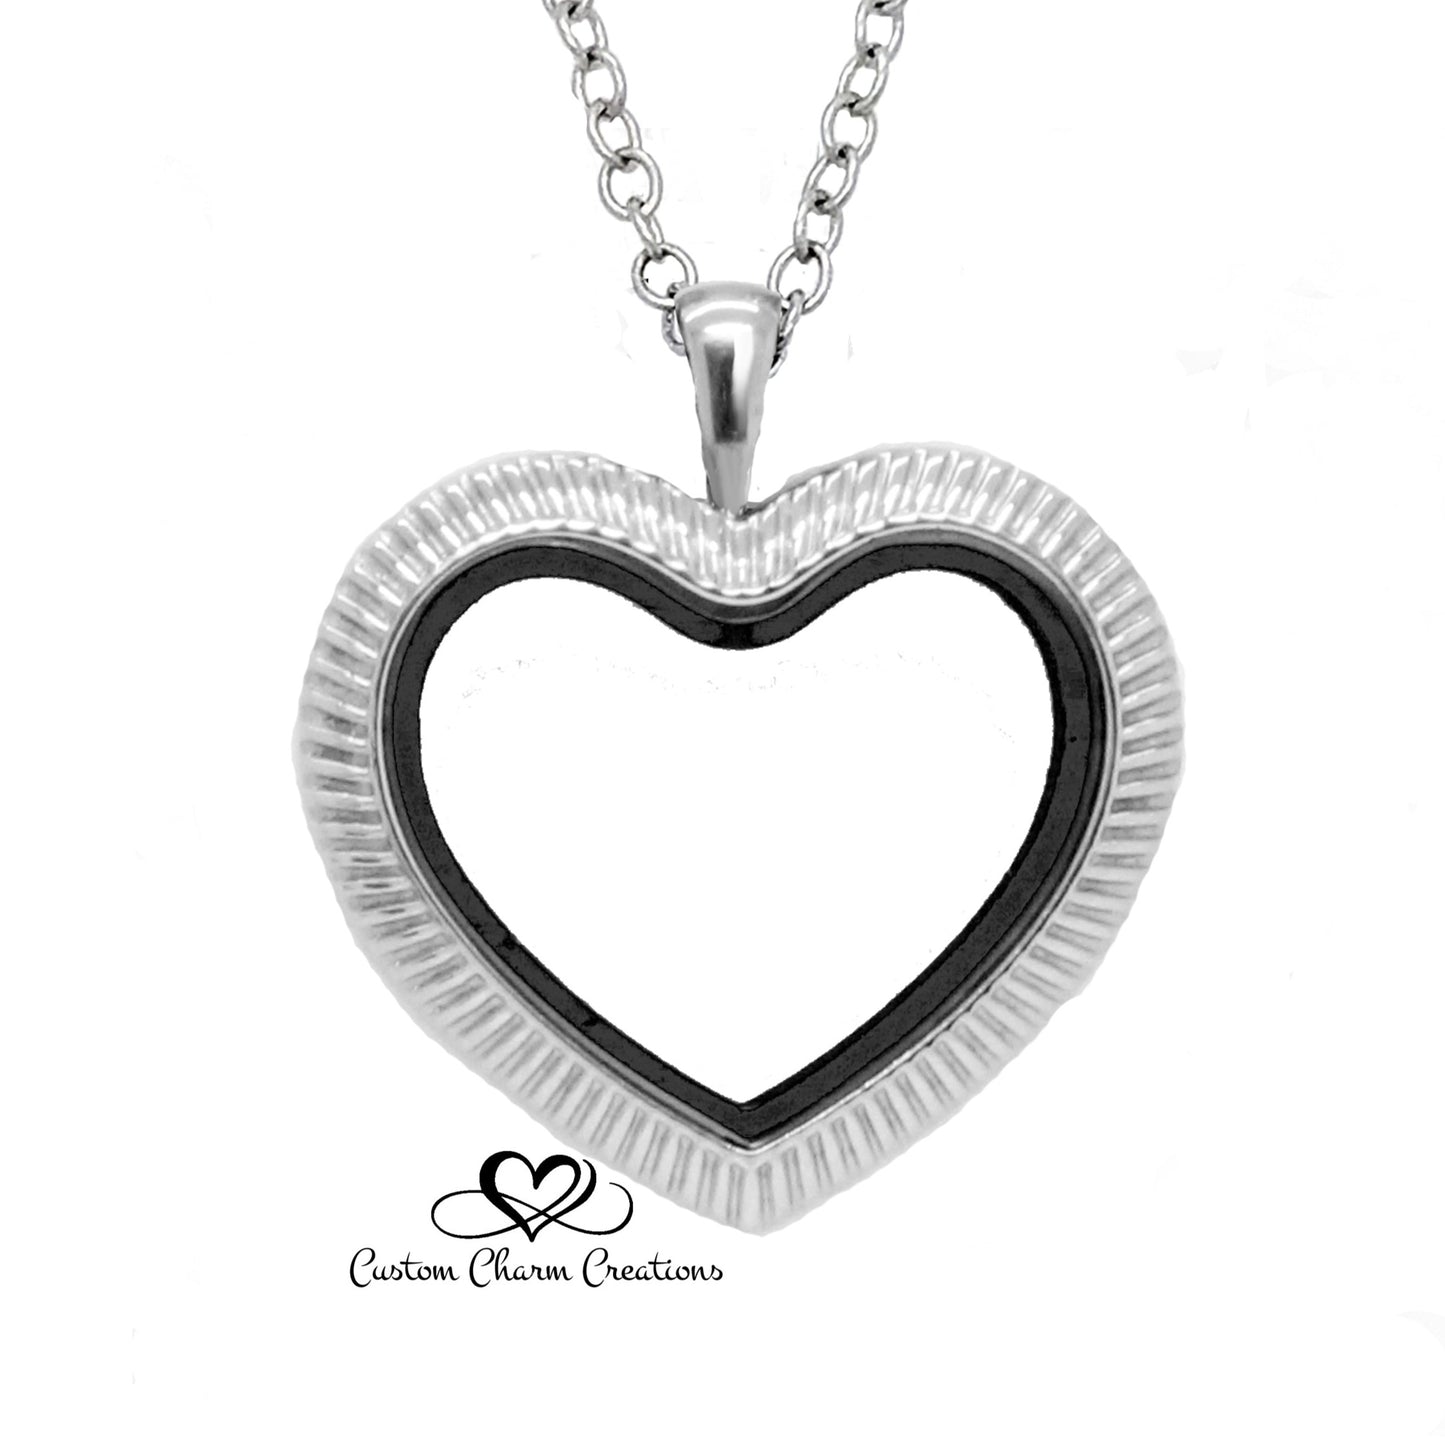 Floating Locket Heart Locket that is Magnetic and comes with a chain of your choice.